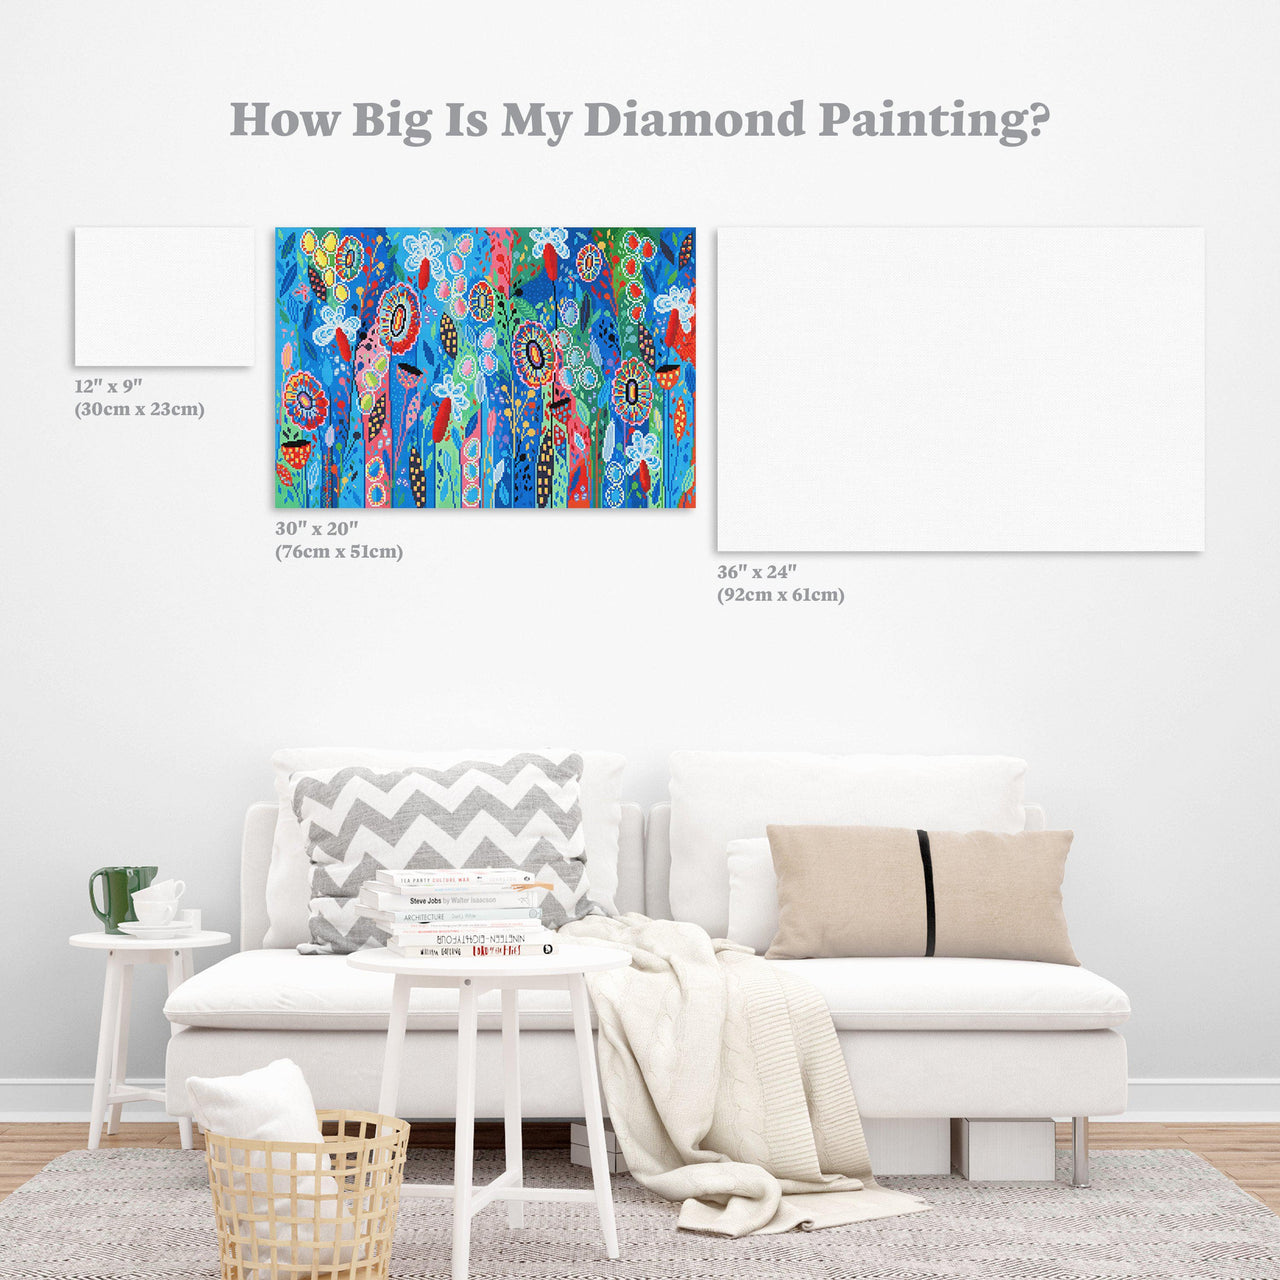 Diamond Painting The Future's So Bright 20" x 30″ (51cm x 76cm) / Round With 38 Colors Including 2 ABs / 48,600